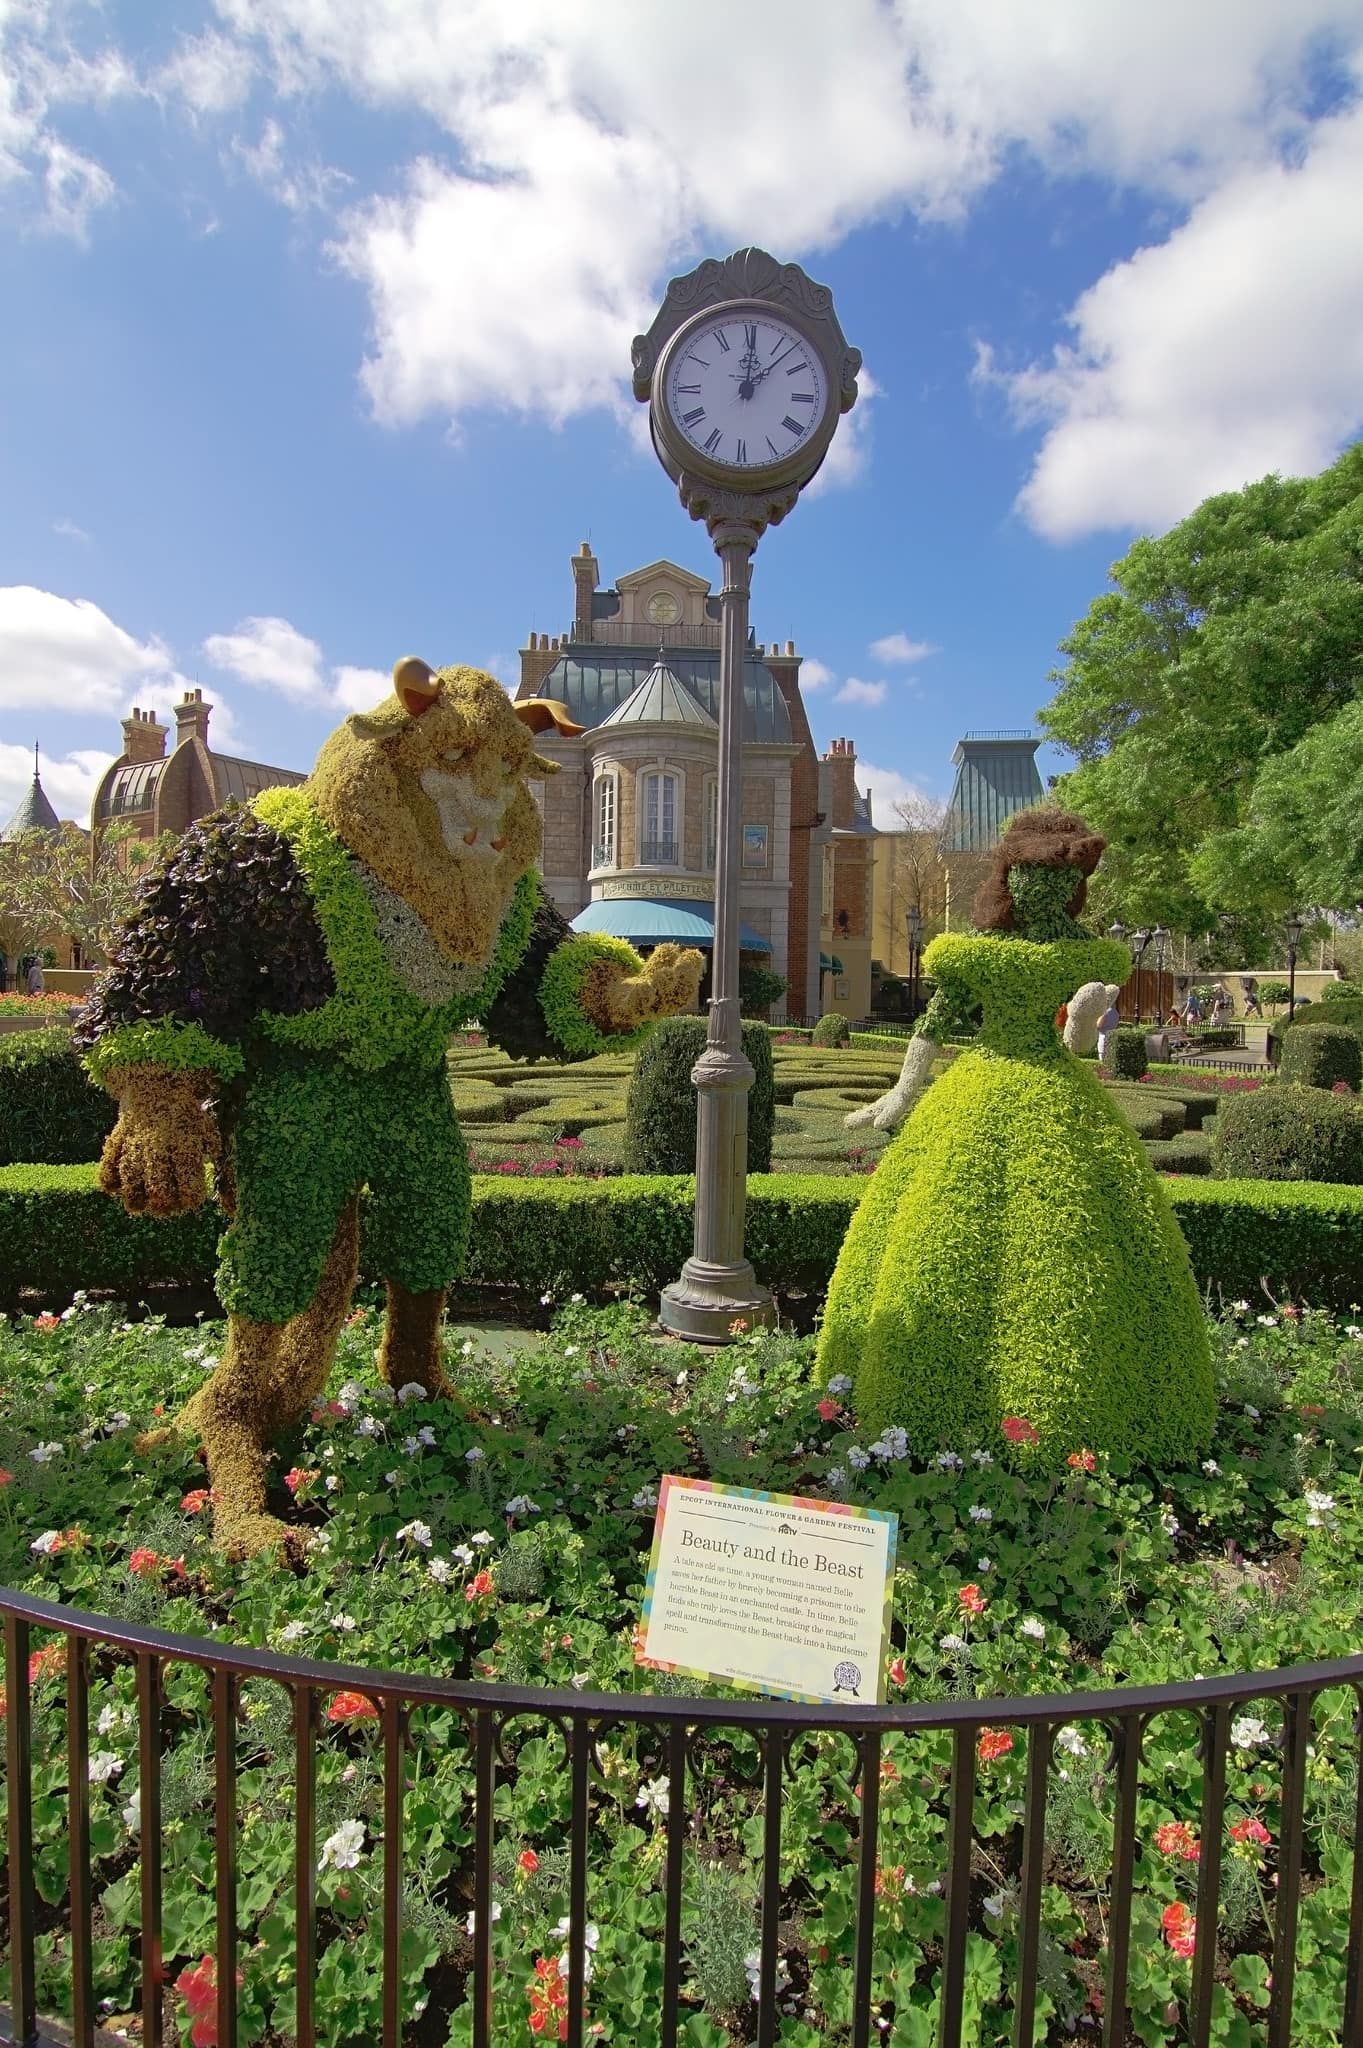 Beast from Beauty and the Beast shrub sculpture